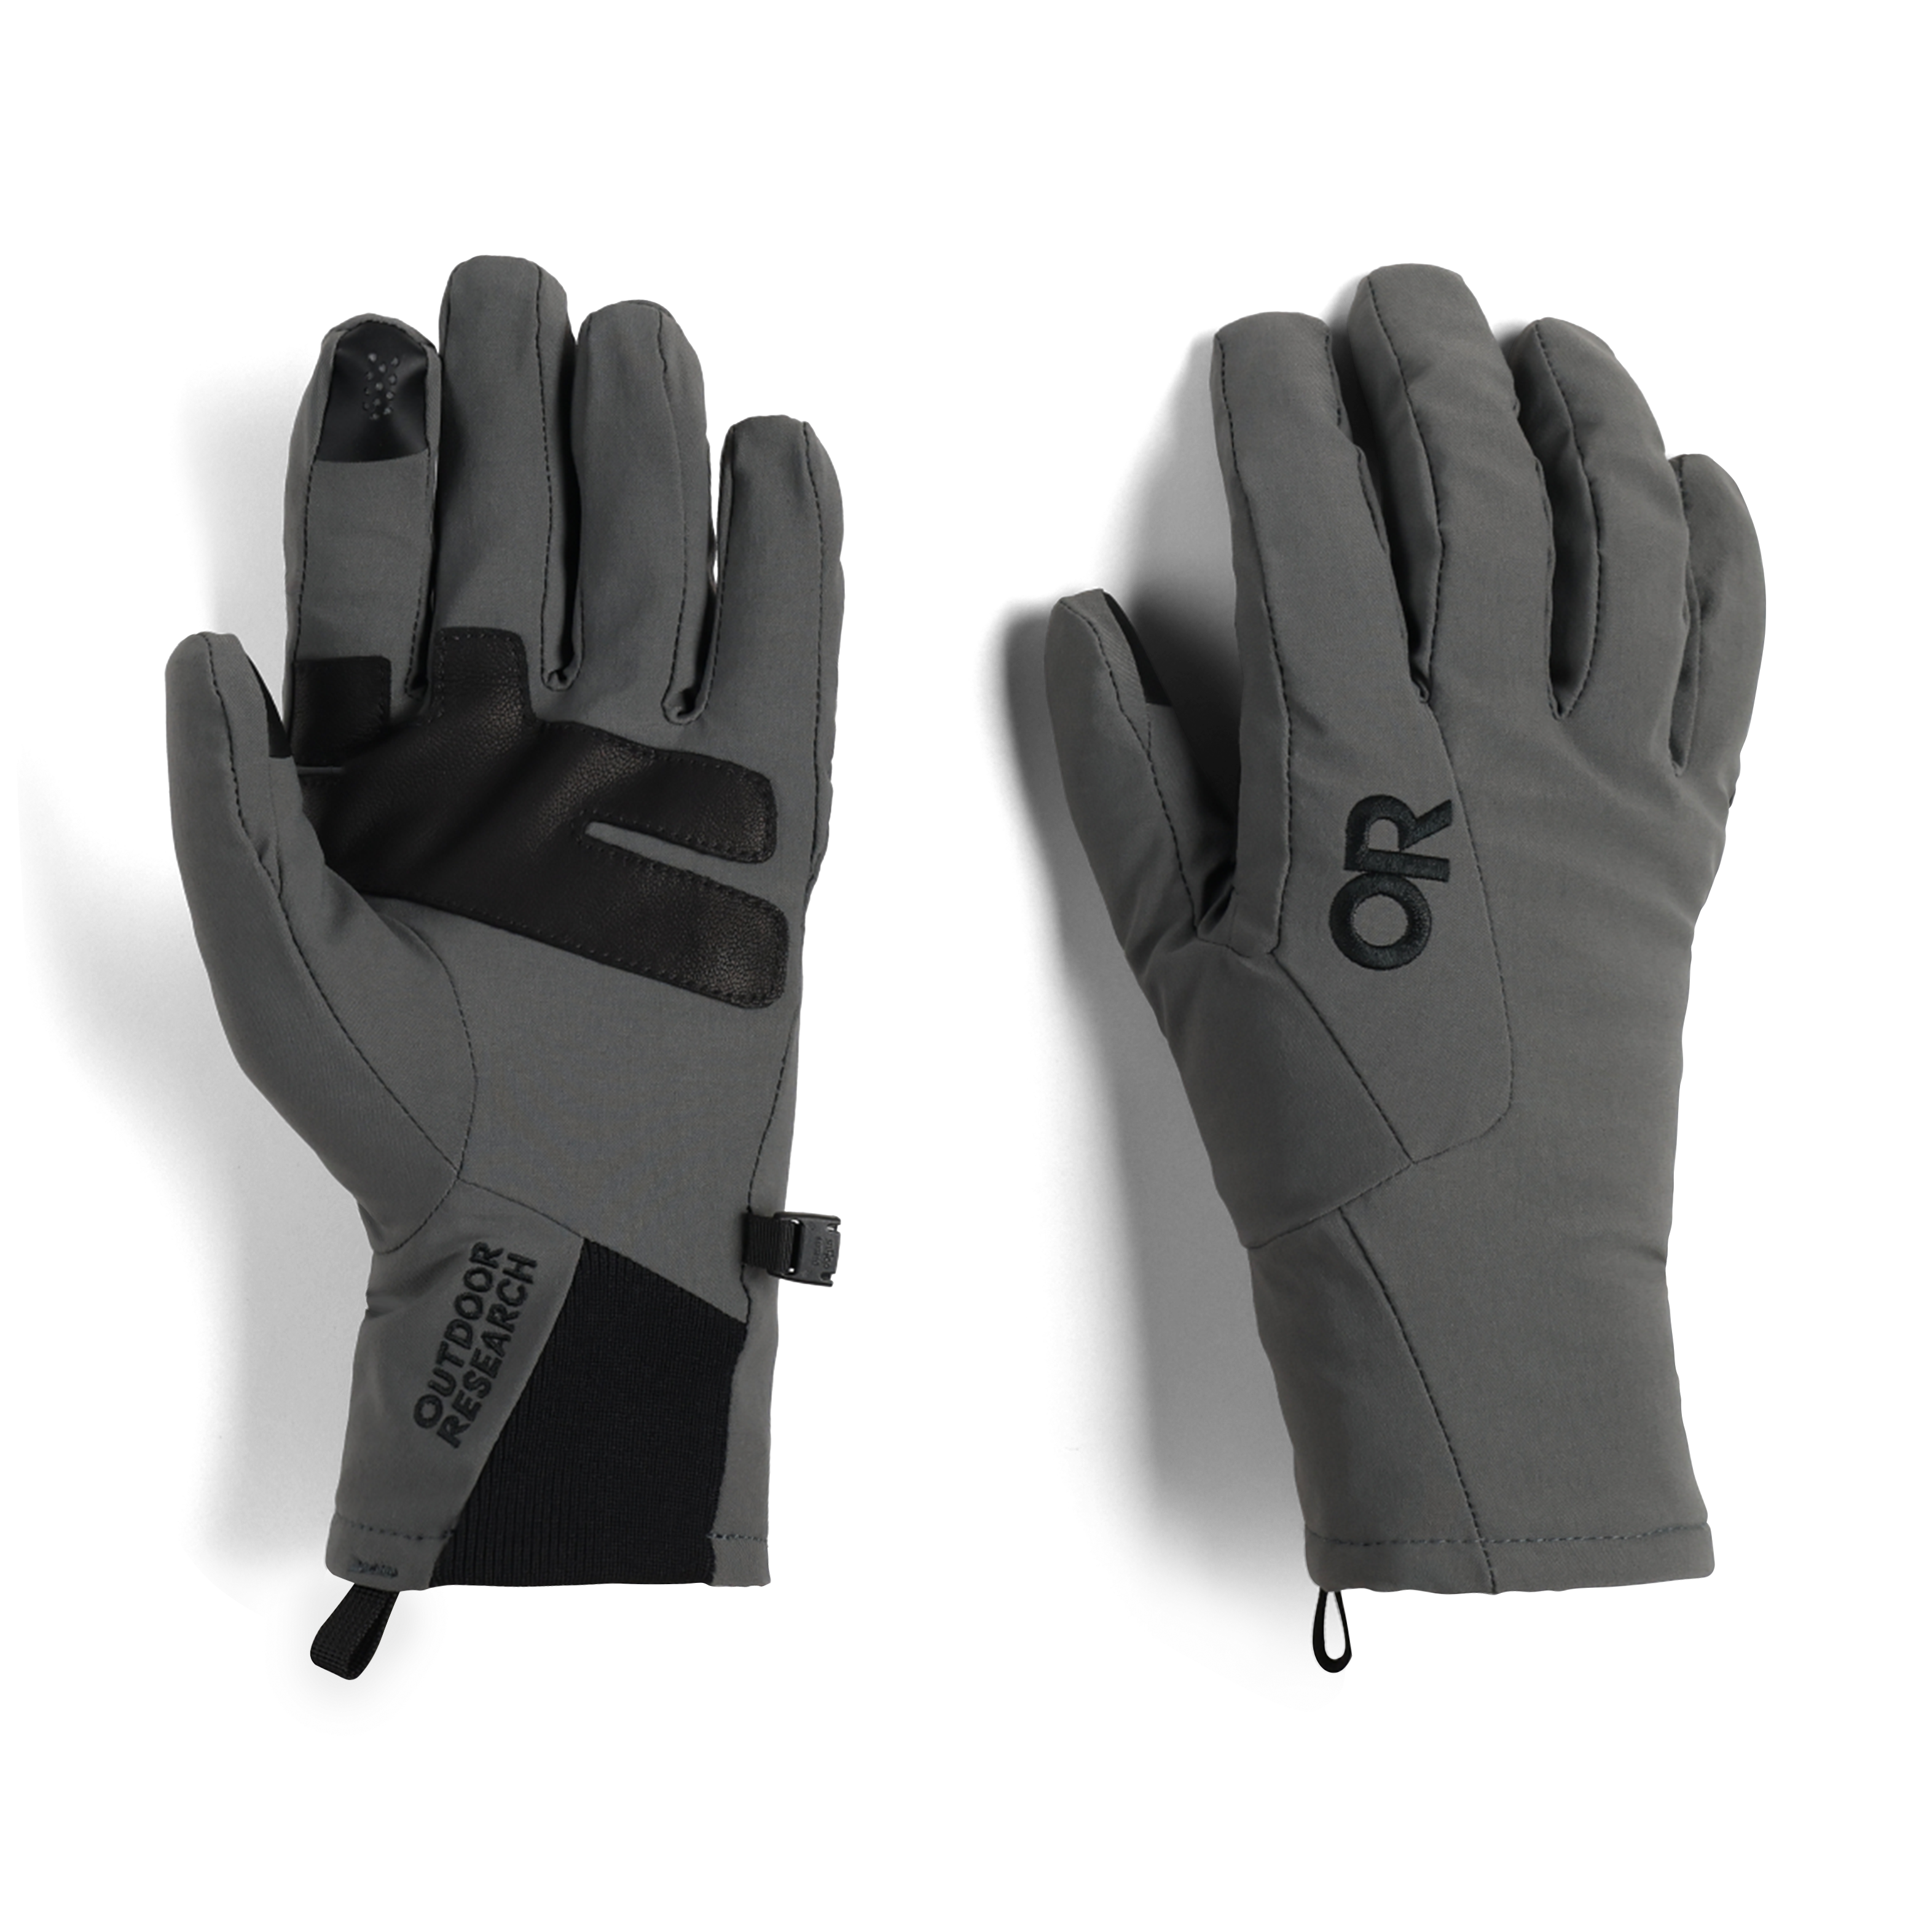 Warm gloves for every adventure